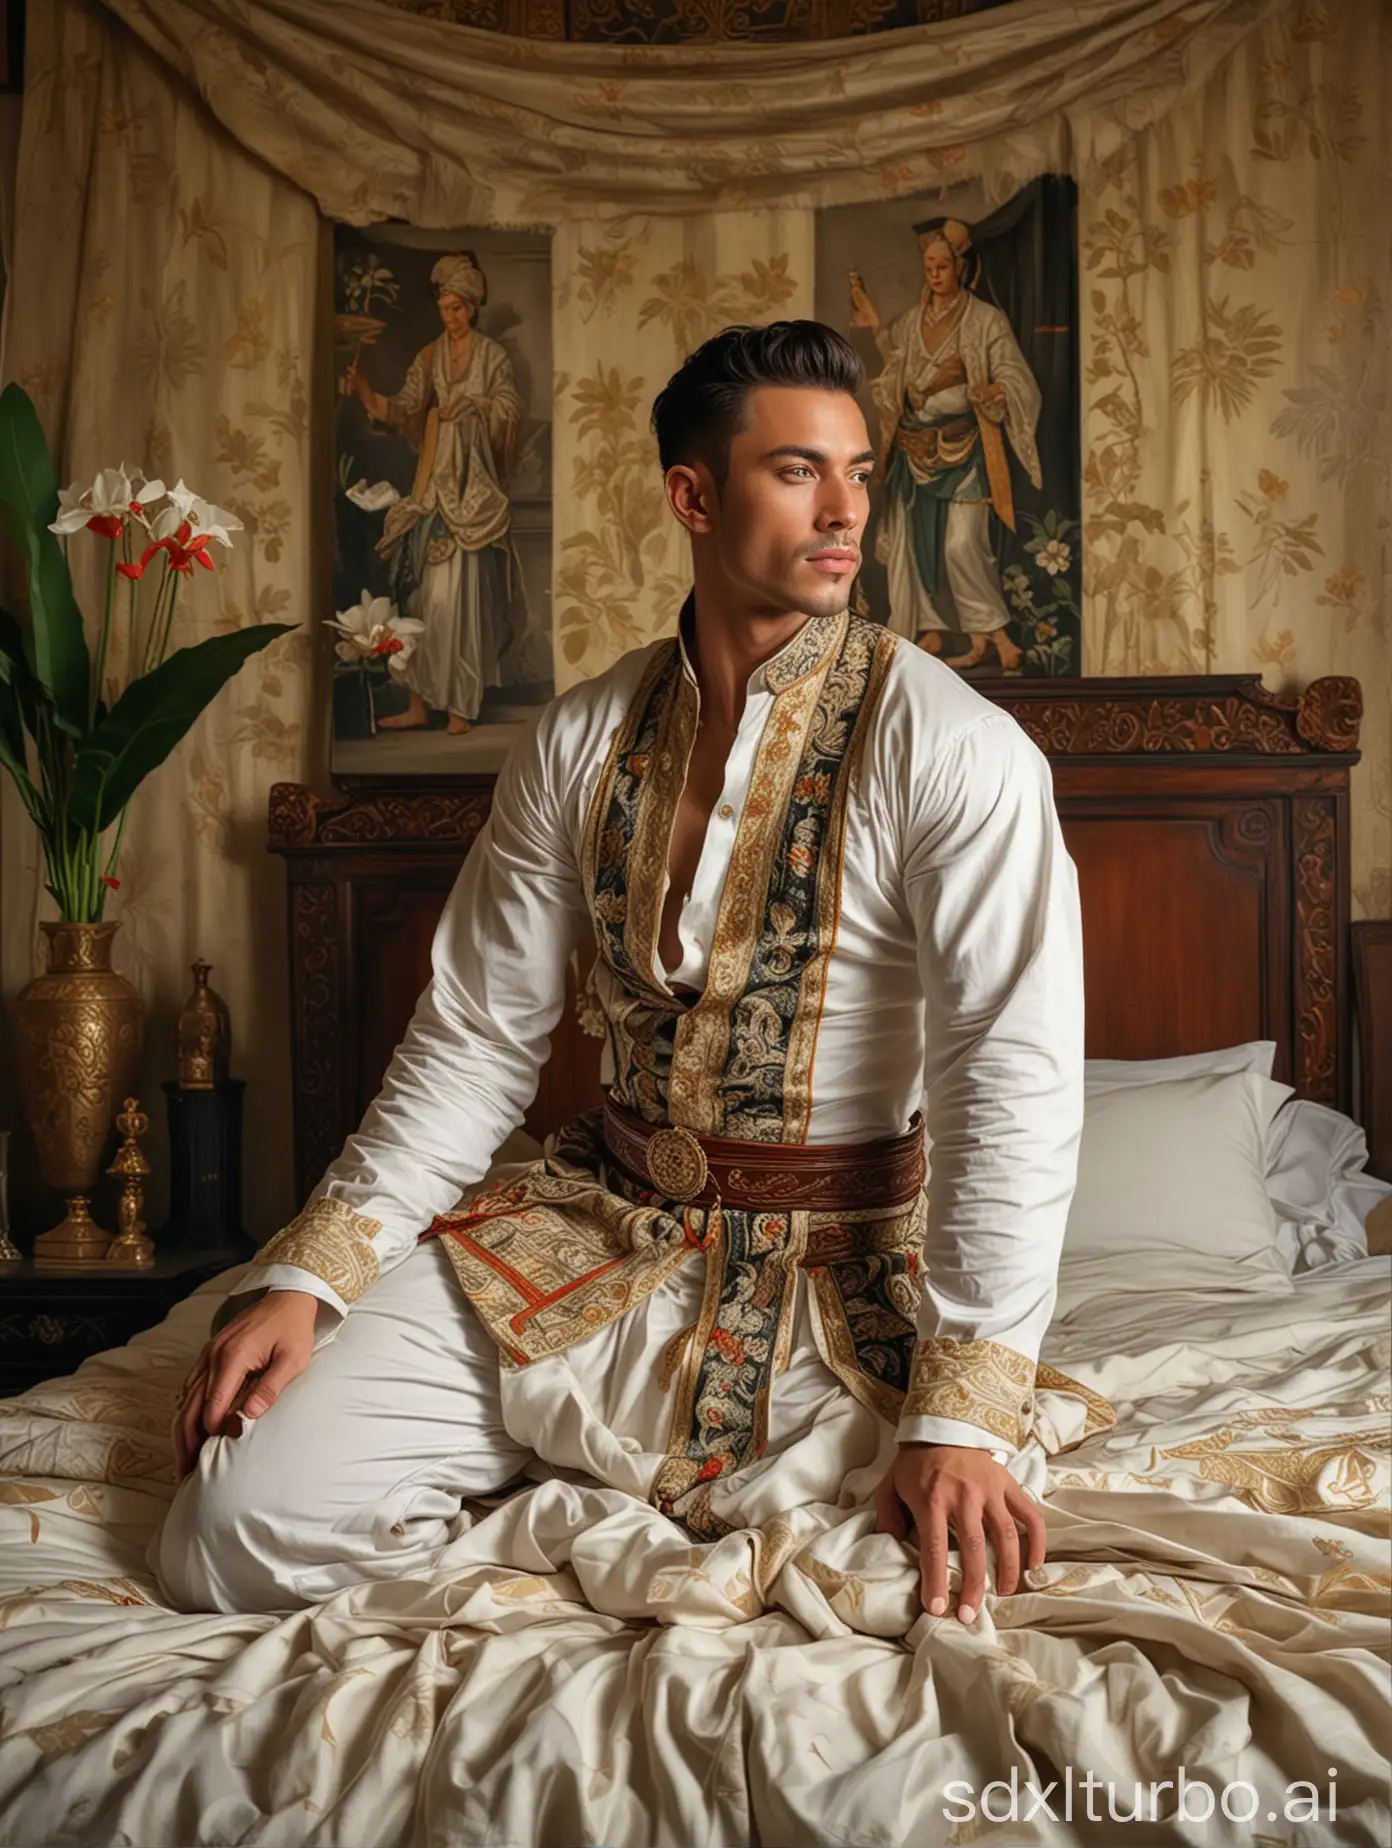 A portrait of a handsome lustfully Manadonese muscular royalty, posing on the bed, in a torn ‘beskap’ traditional attire, with a background of a Javanese bedroom, in the style of a painting by Leyendecker.